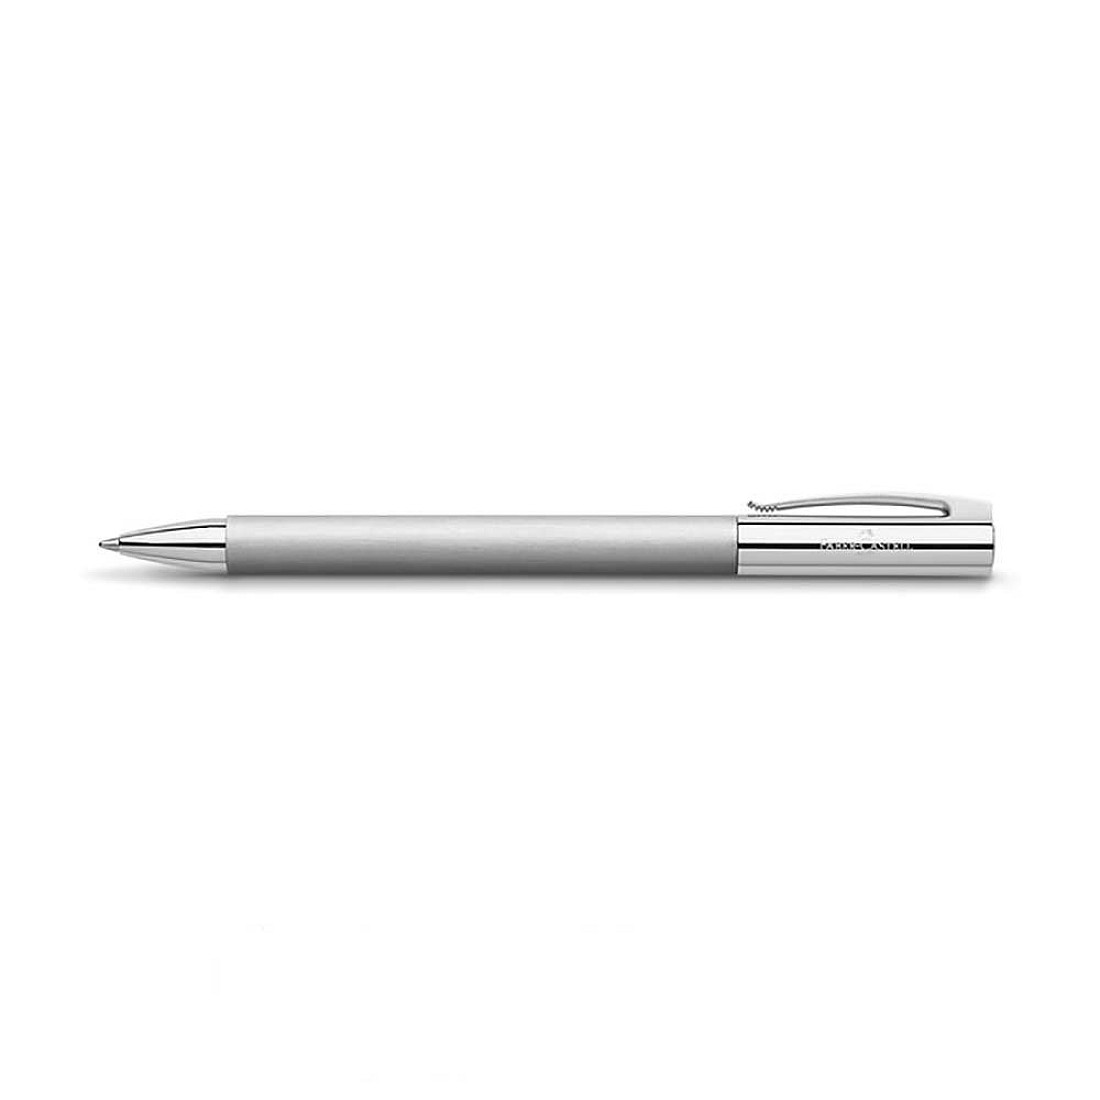 Faber-Castell Ambition Metal Ballpoint